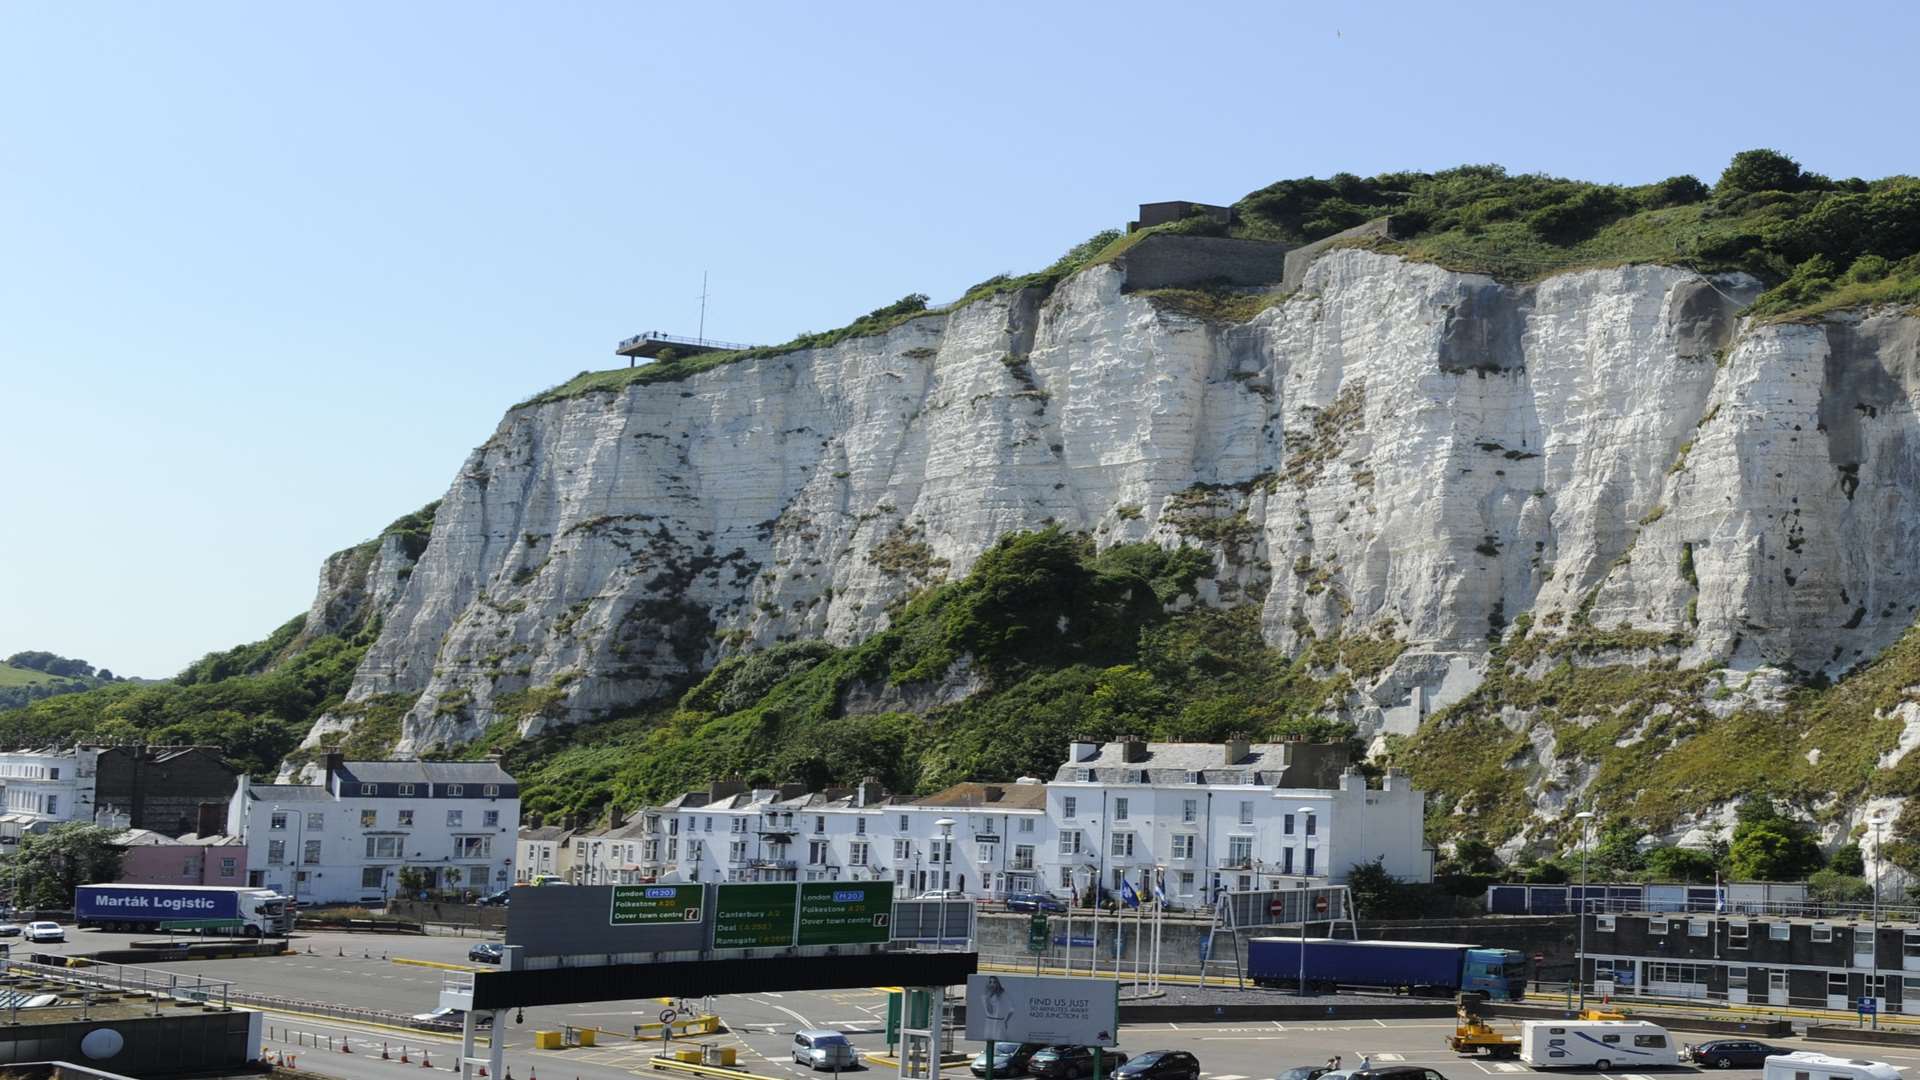 Dover with its iconic White Cliffs